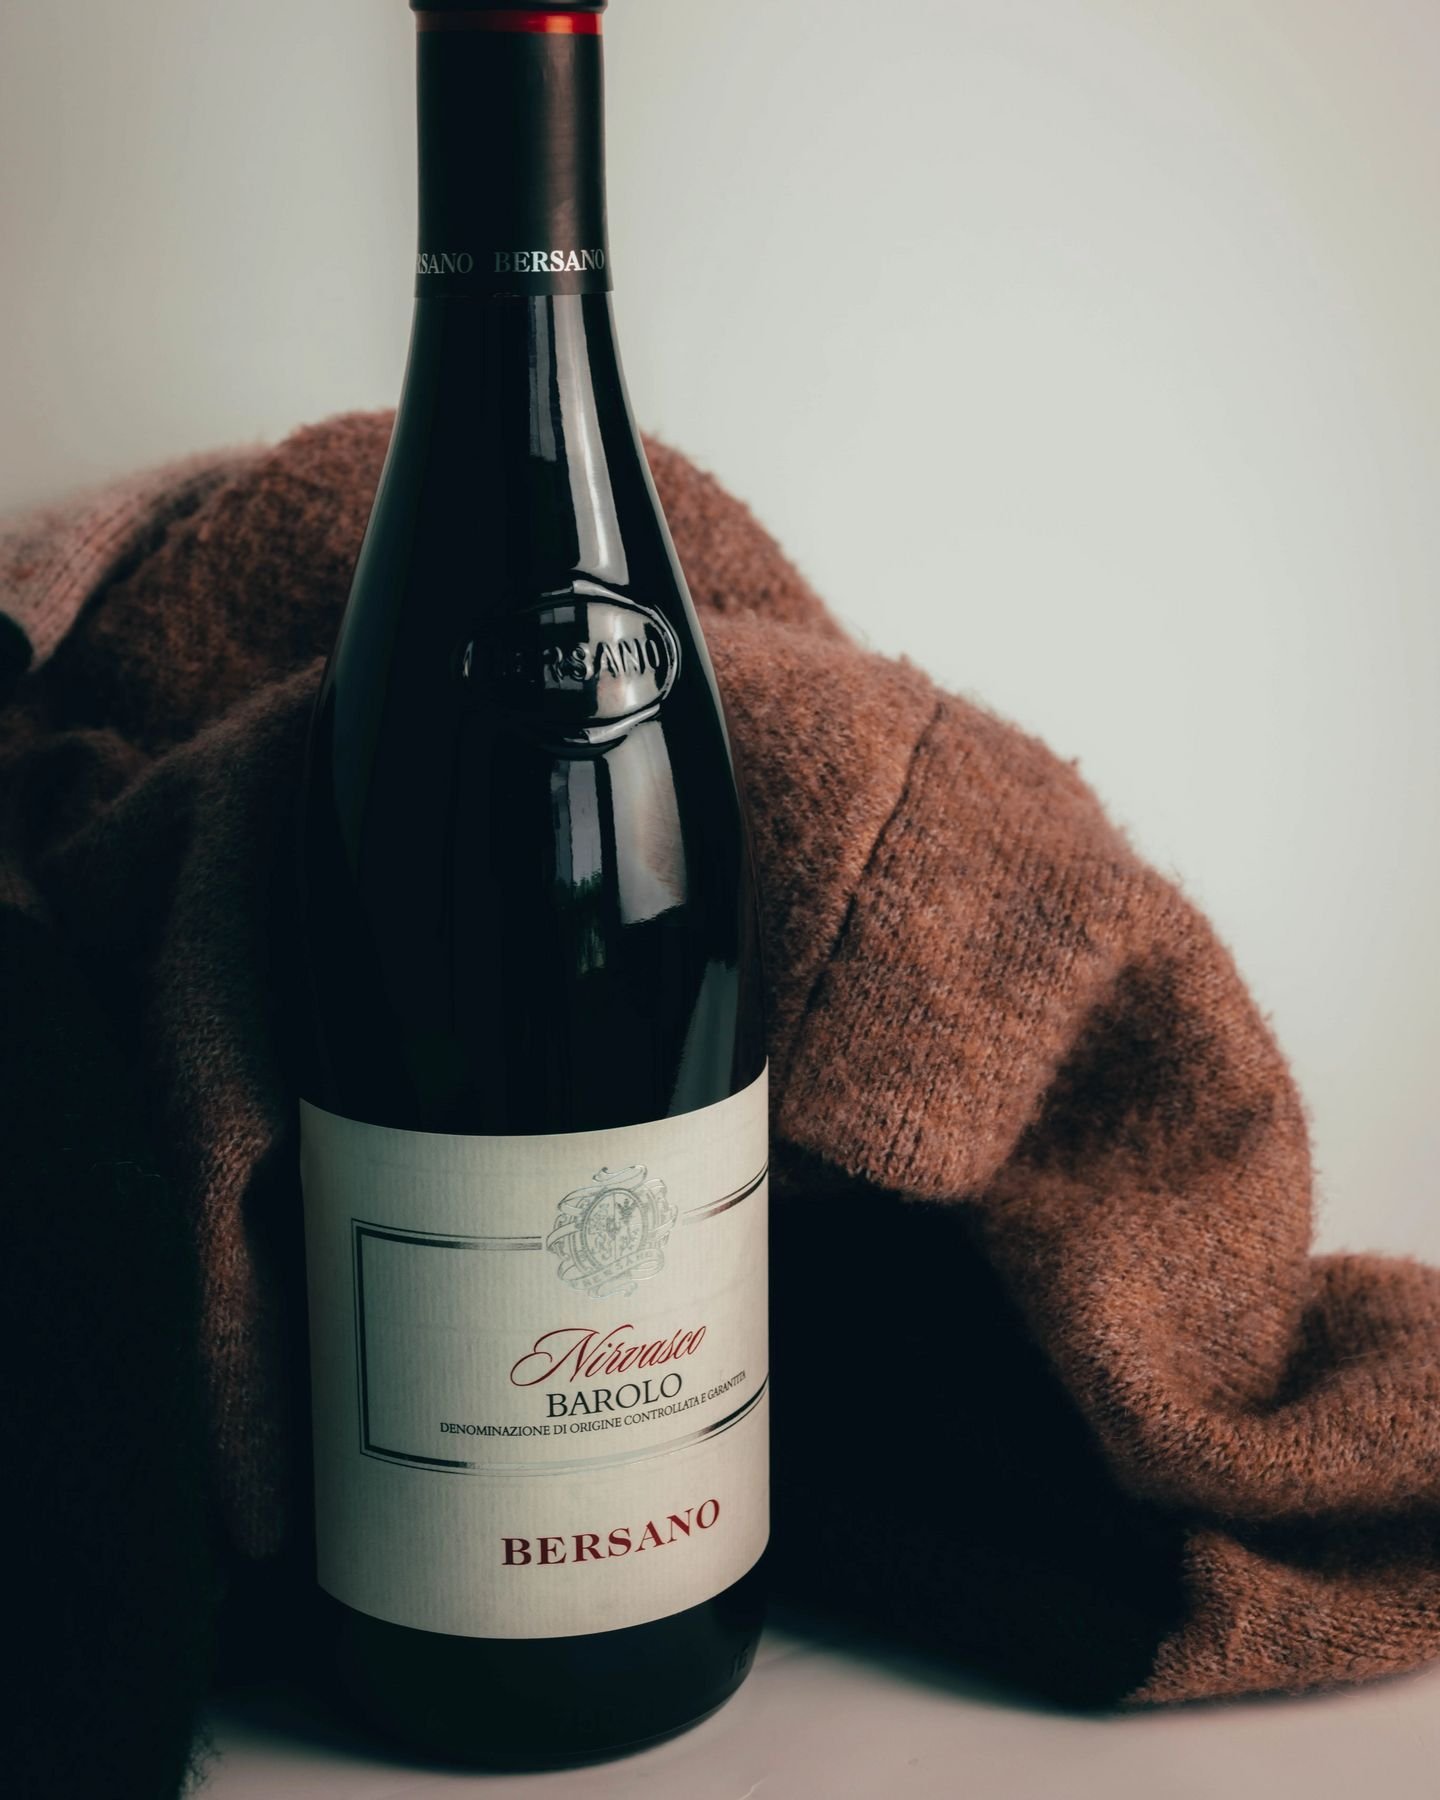 🍇 Why wait for grape harvest season when you can immerse yourself in the distinguished flavor of Bersano Barolo Nirvasco right now? Its notes of spices and ripe fruit, harmonized with hints of leather and licorice, offer an intoxicating journey thro